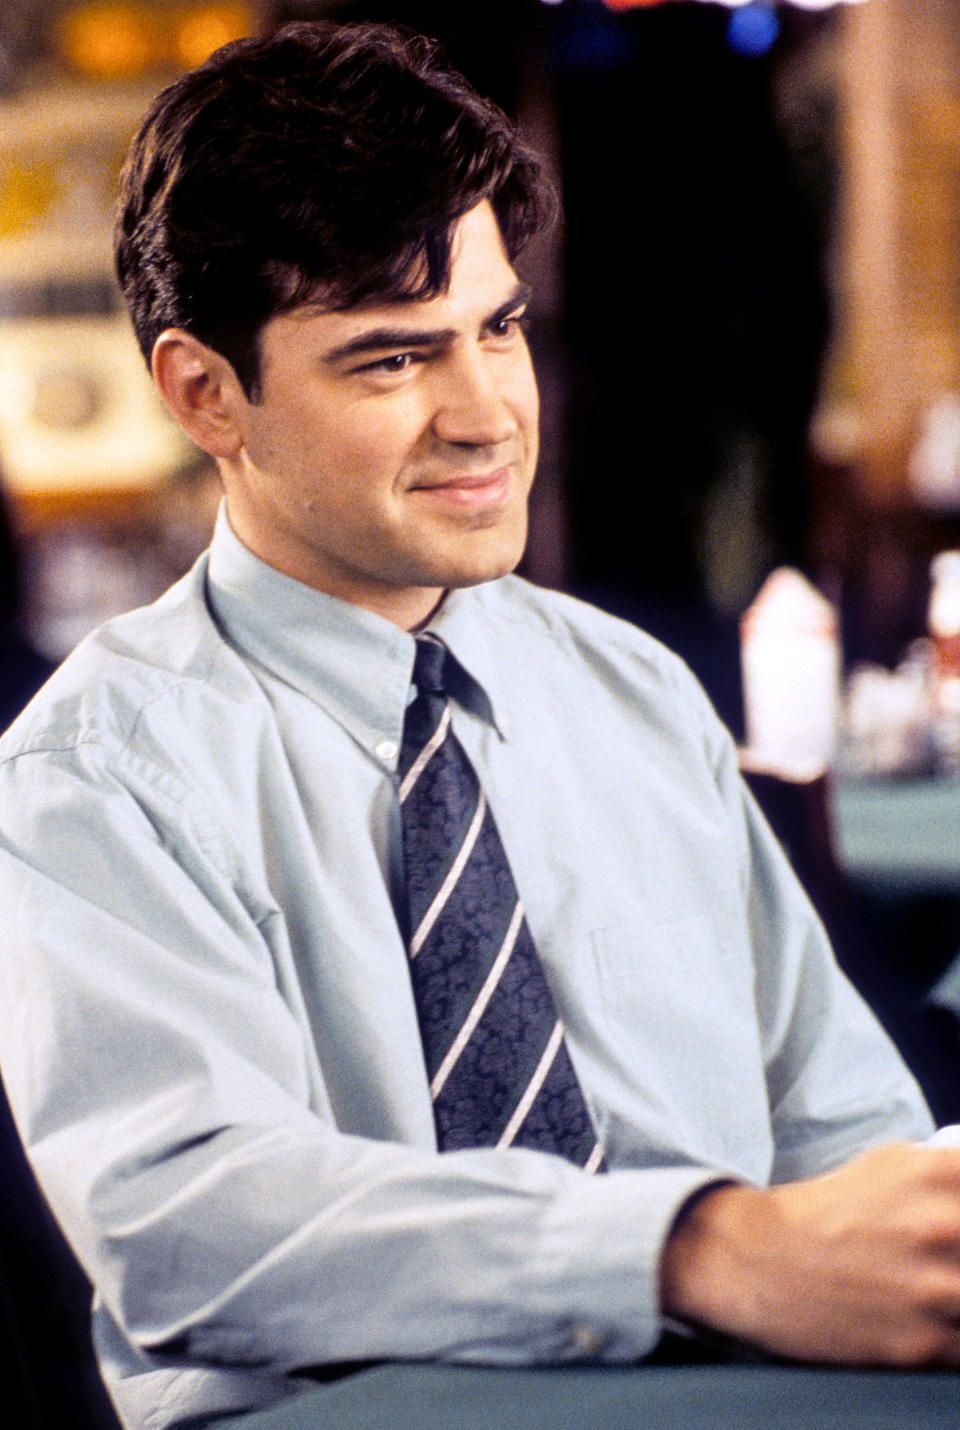 Ron Livingston in "Office Space"